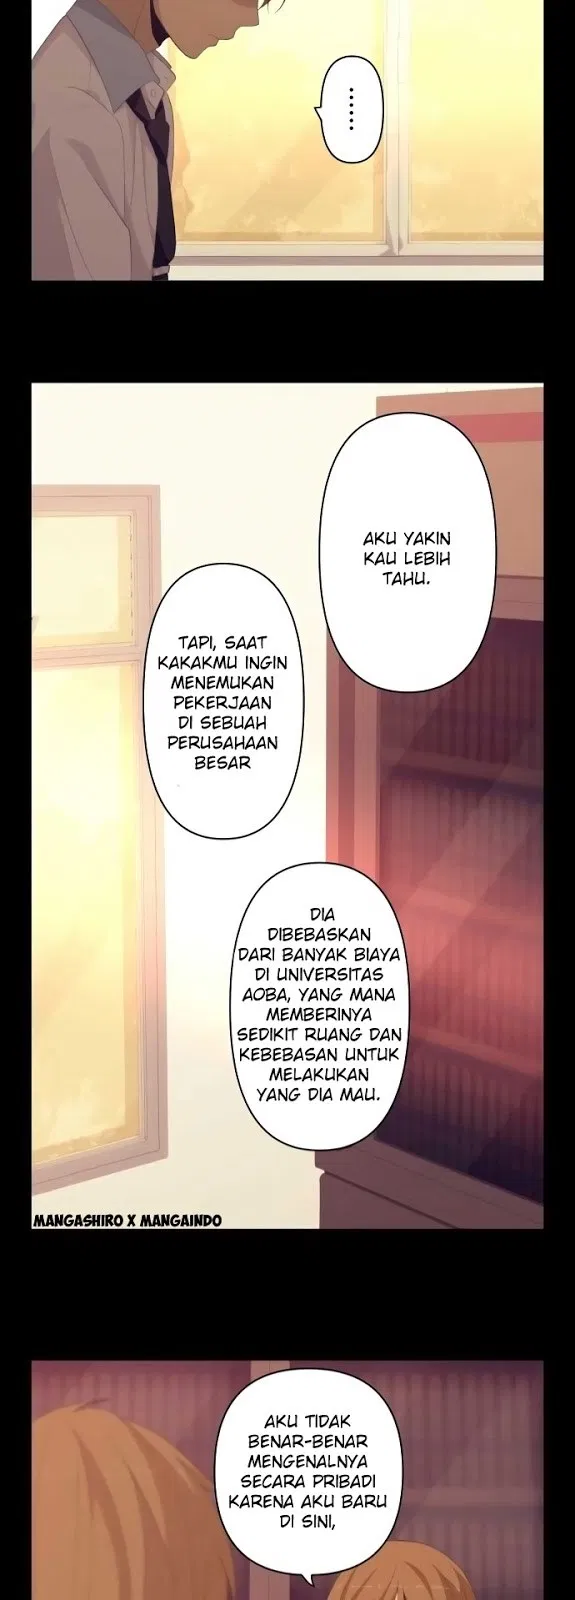 ReLIFE Chapter 161